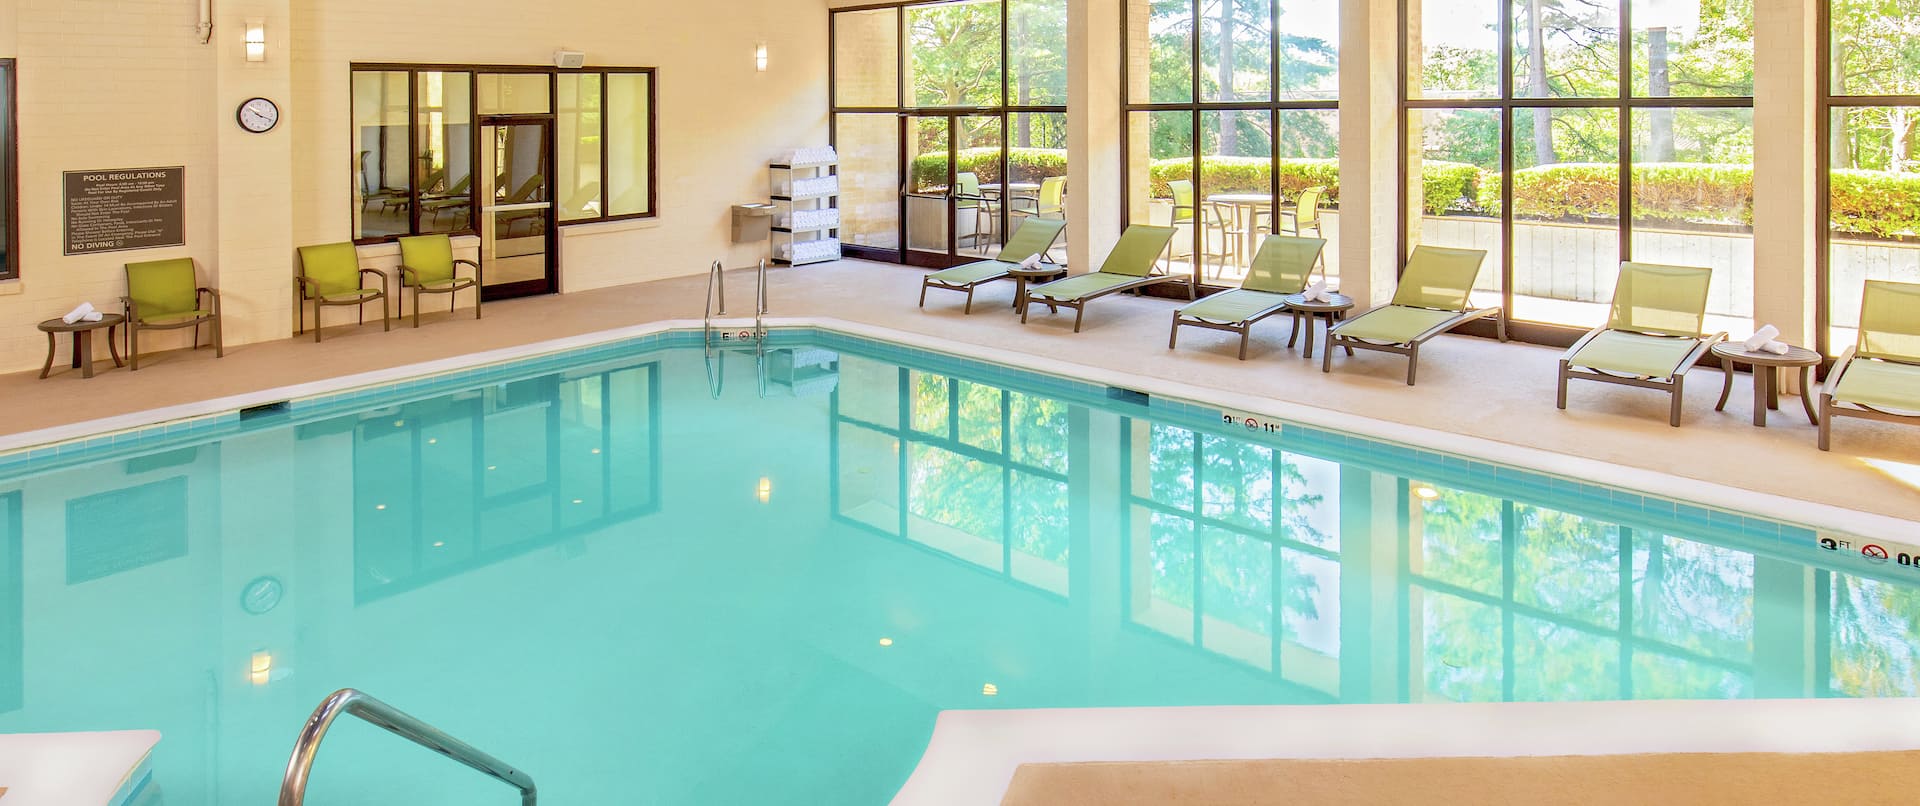 Take an Early Morning Splash in Our Indoor Pool